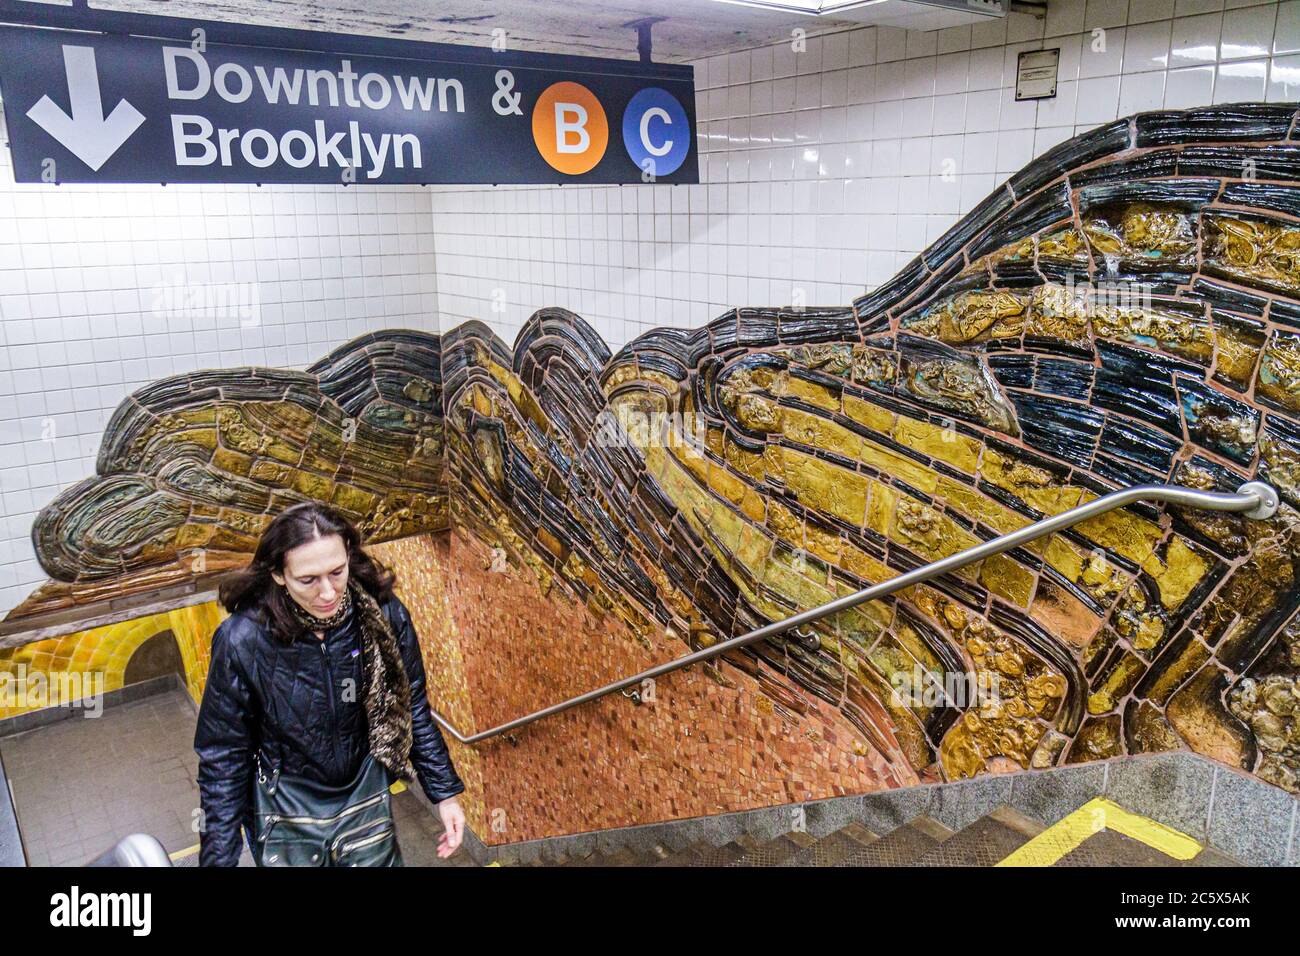 New York City,NYC NY Manhattan,Uptown,MTA New York Subway system,81st Street Station,B C highway Route,8th Eighth Avenue Line,woman female women adult Stock Photo